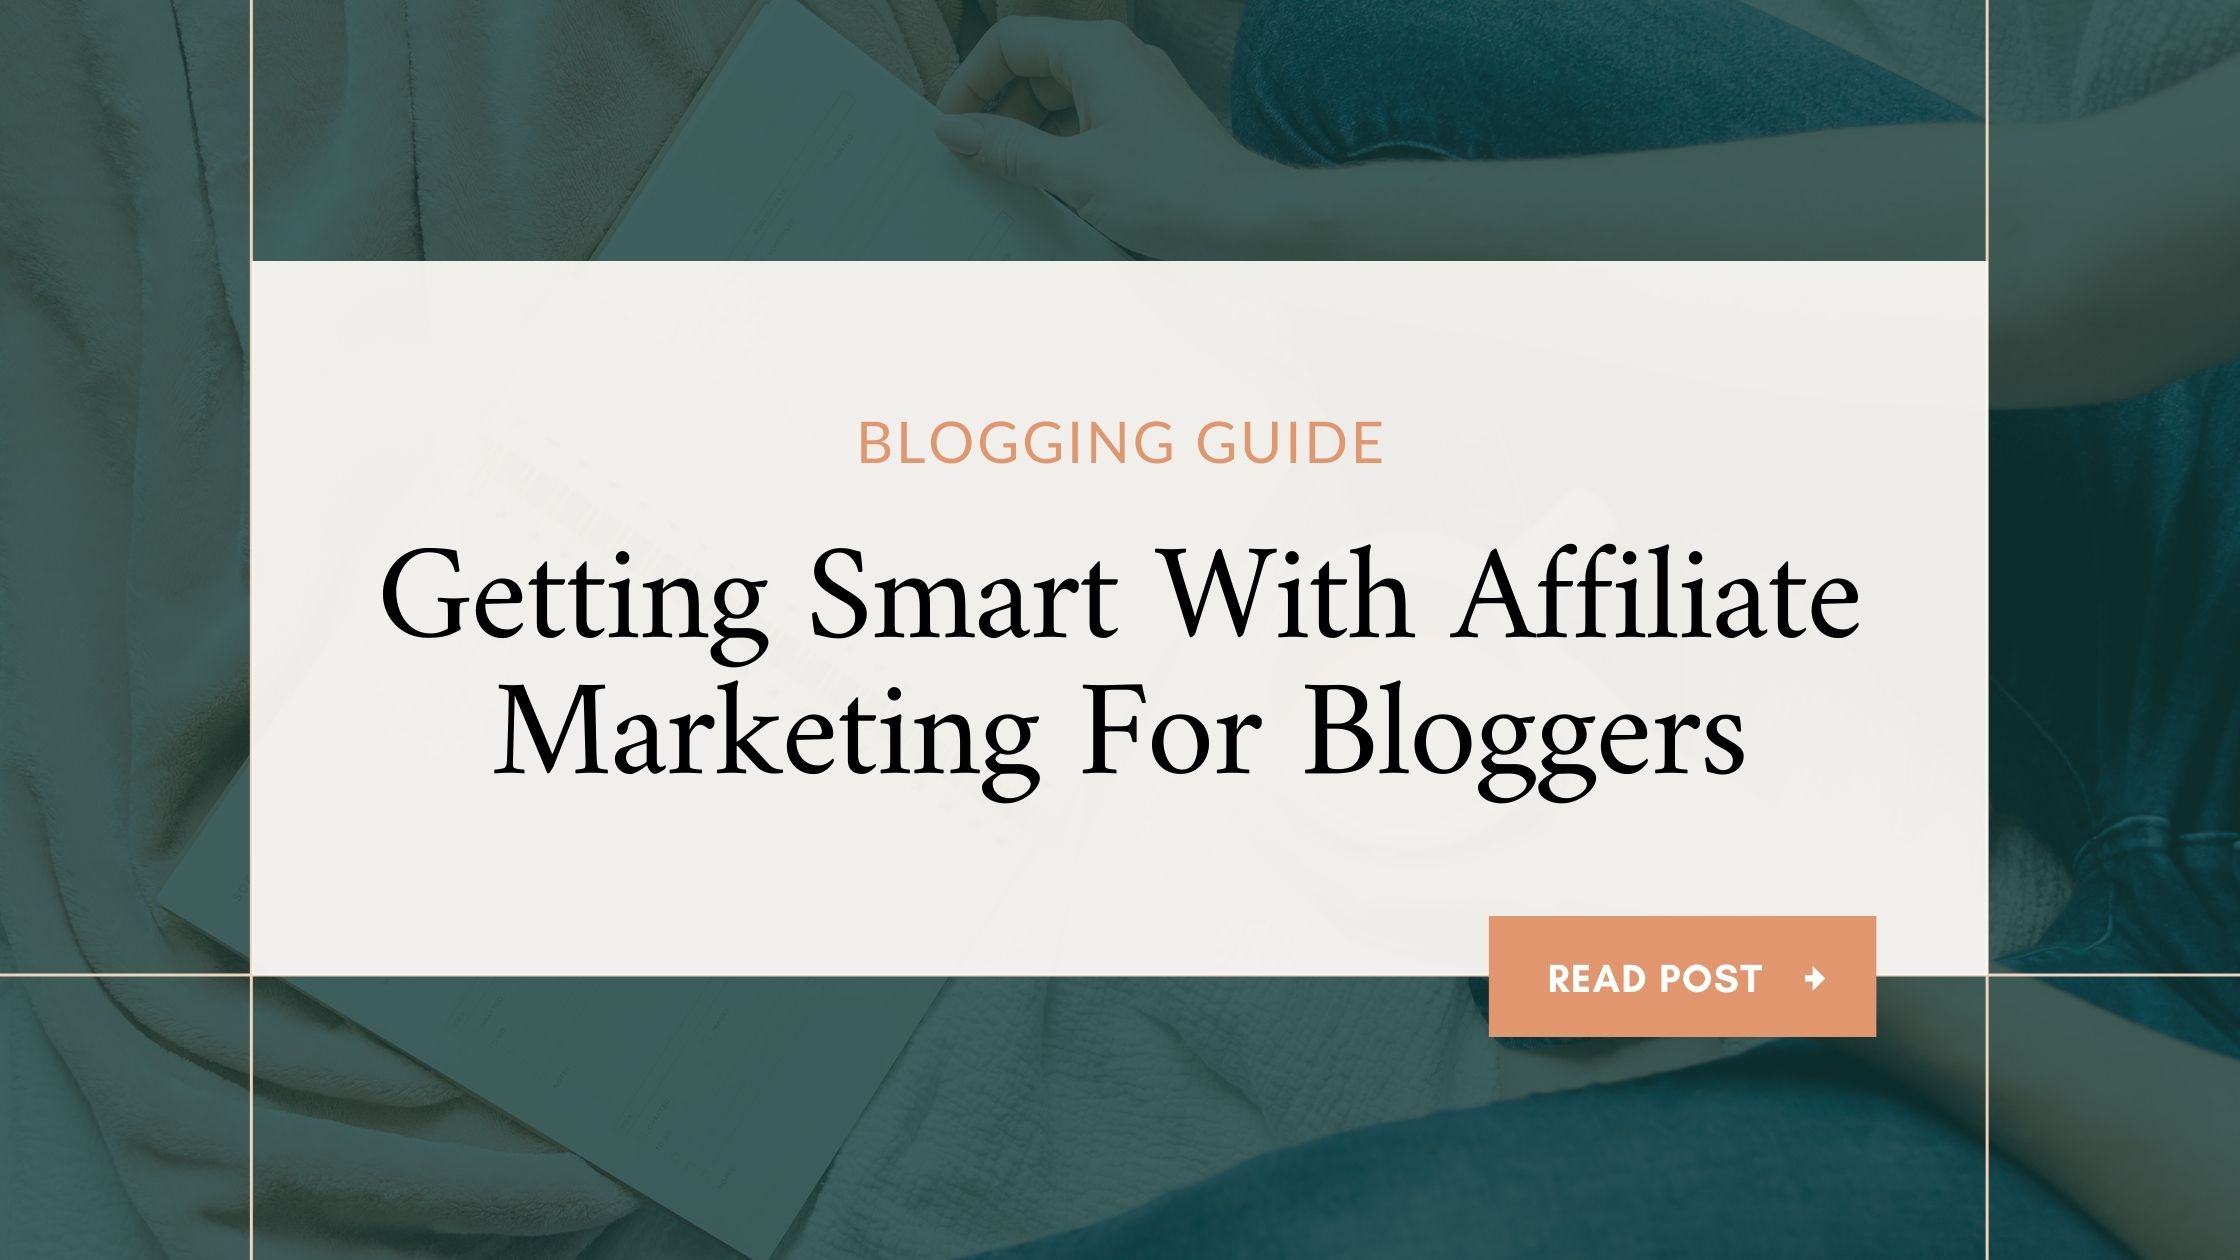 Getting Smart With Affiliate Marketing For Bloggers